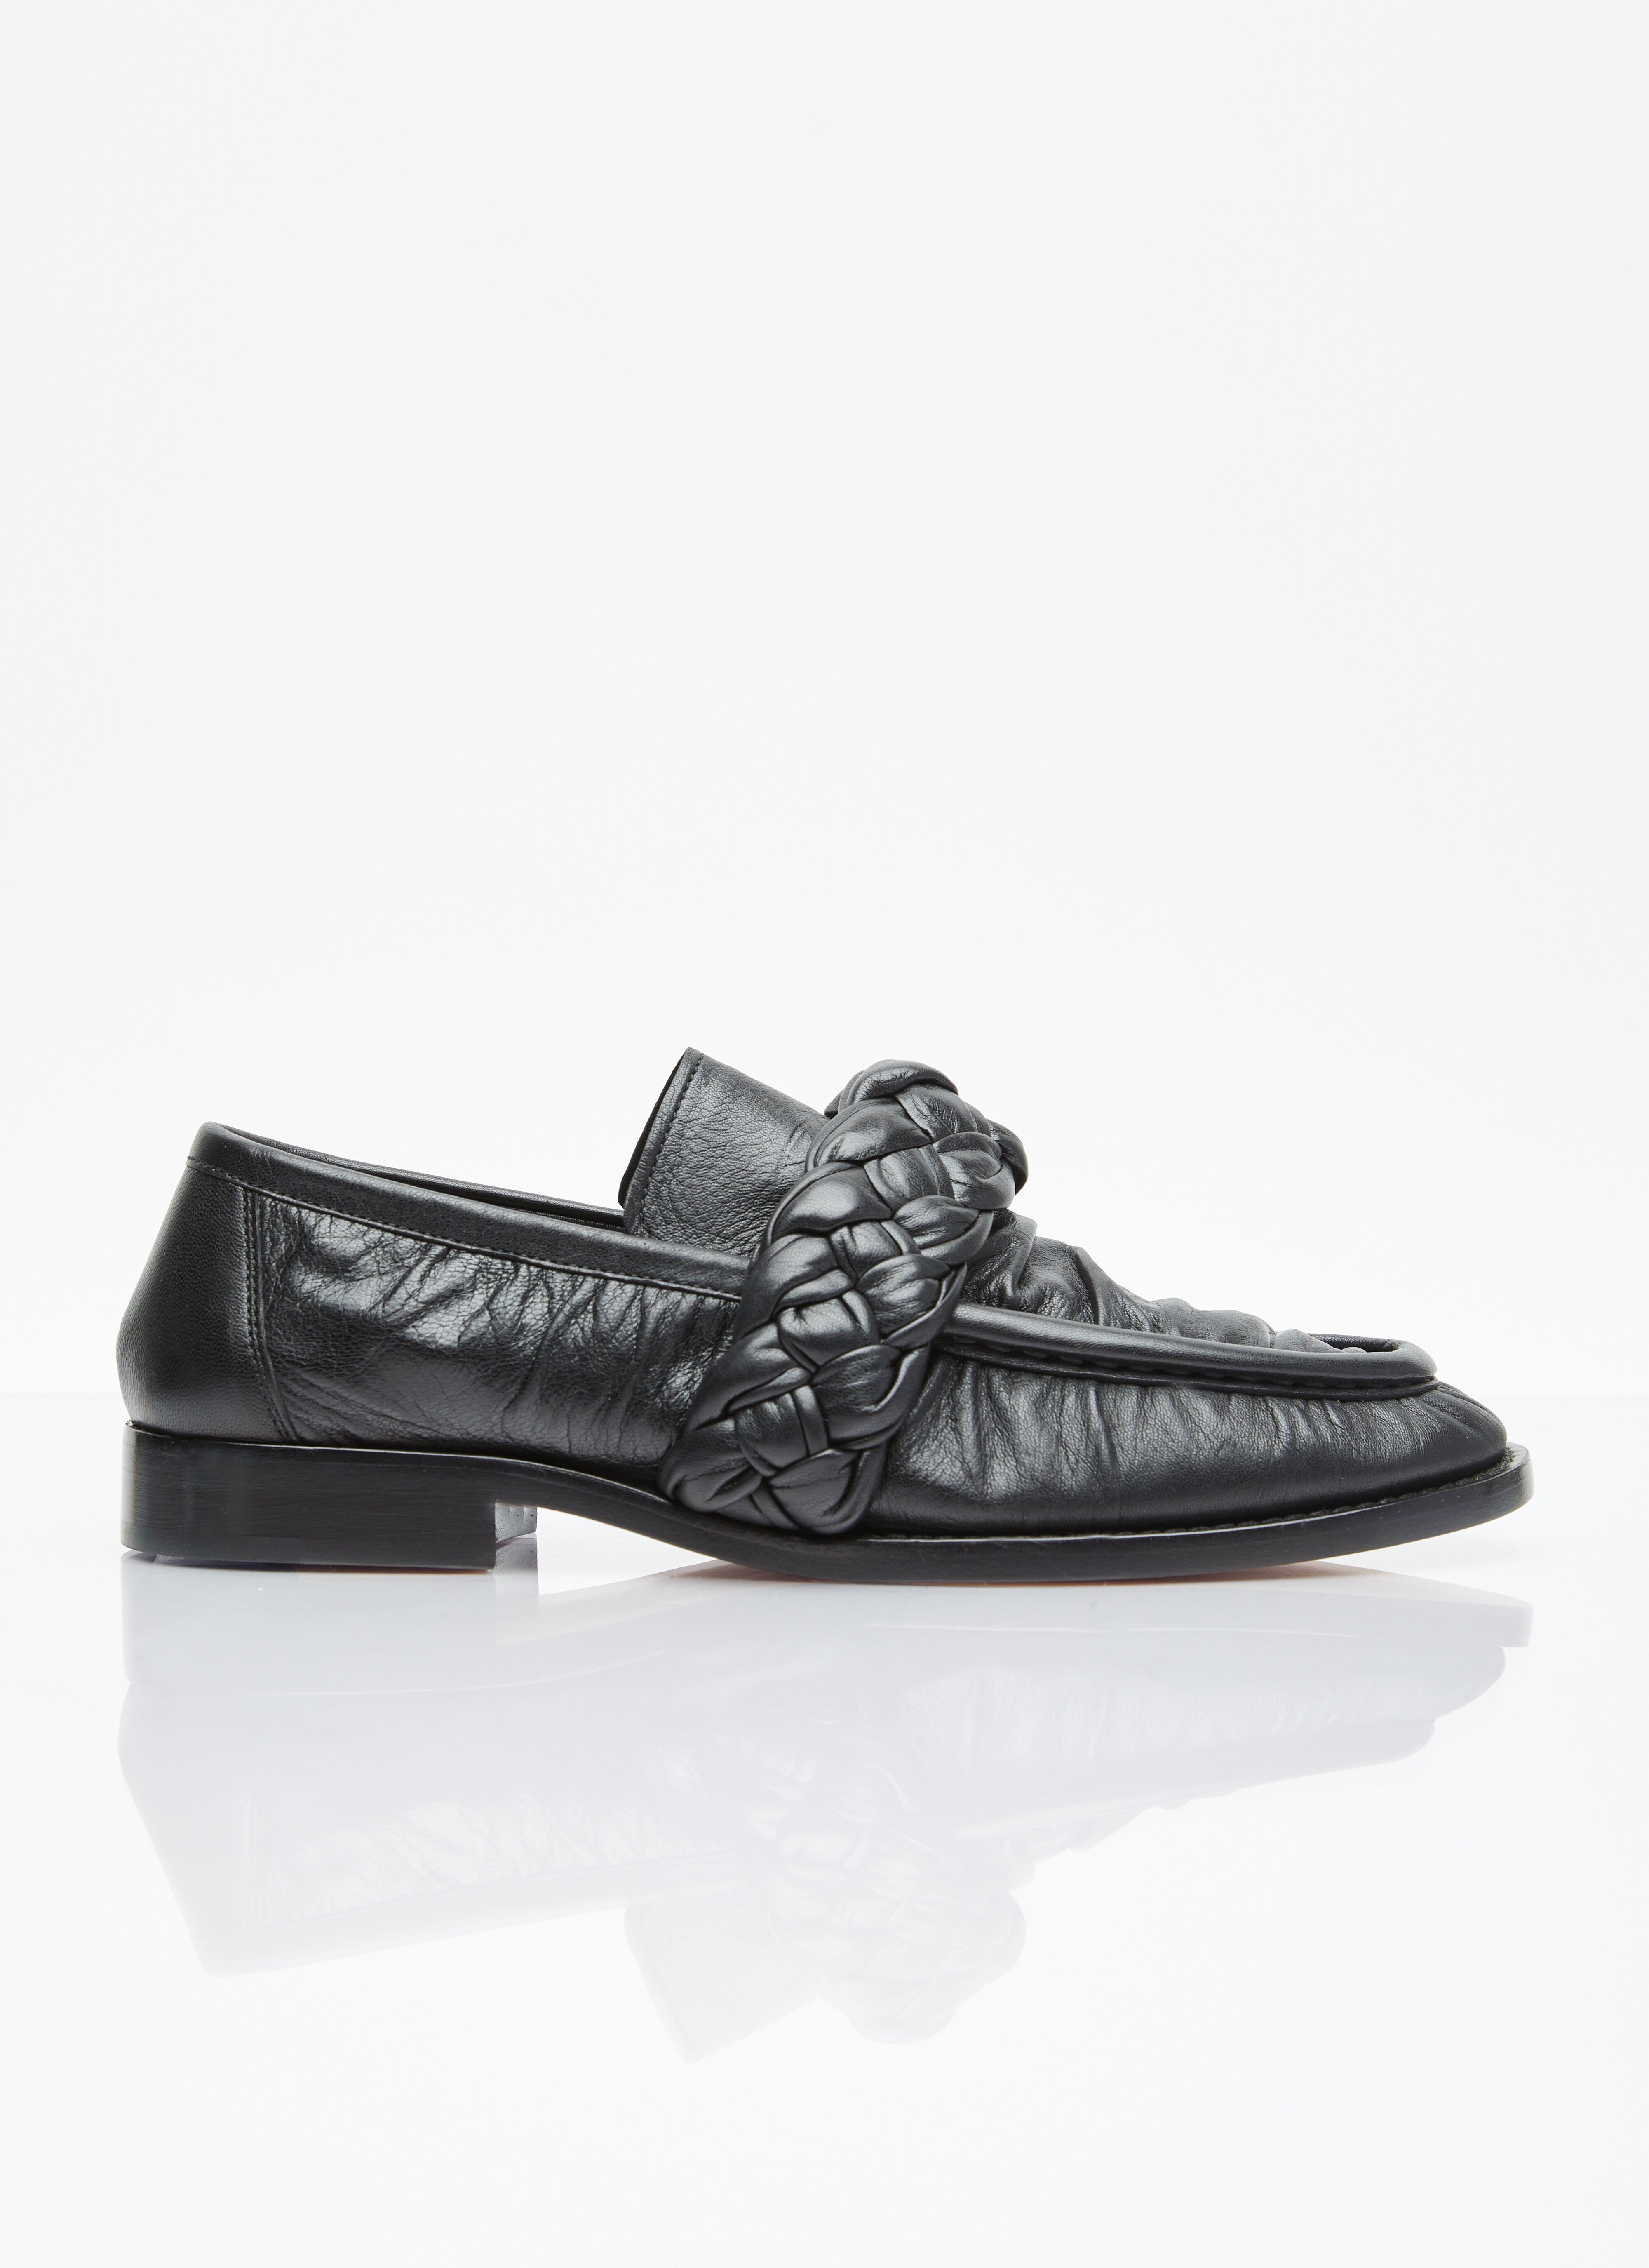 Saint Laurent Knotted Leather Loafers 黑色 sla0254045